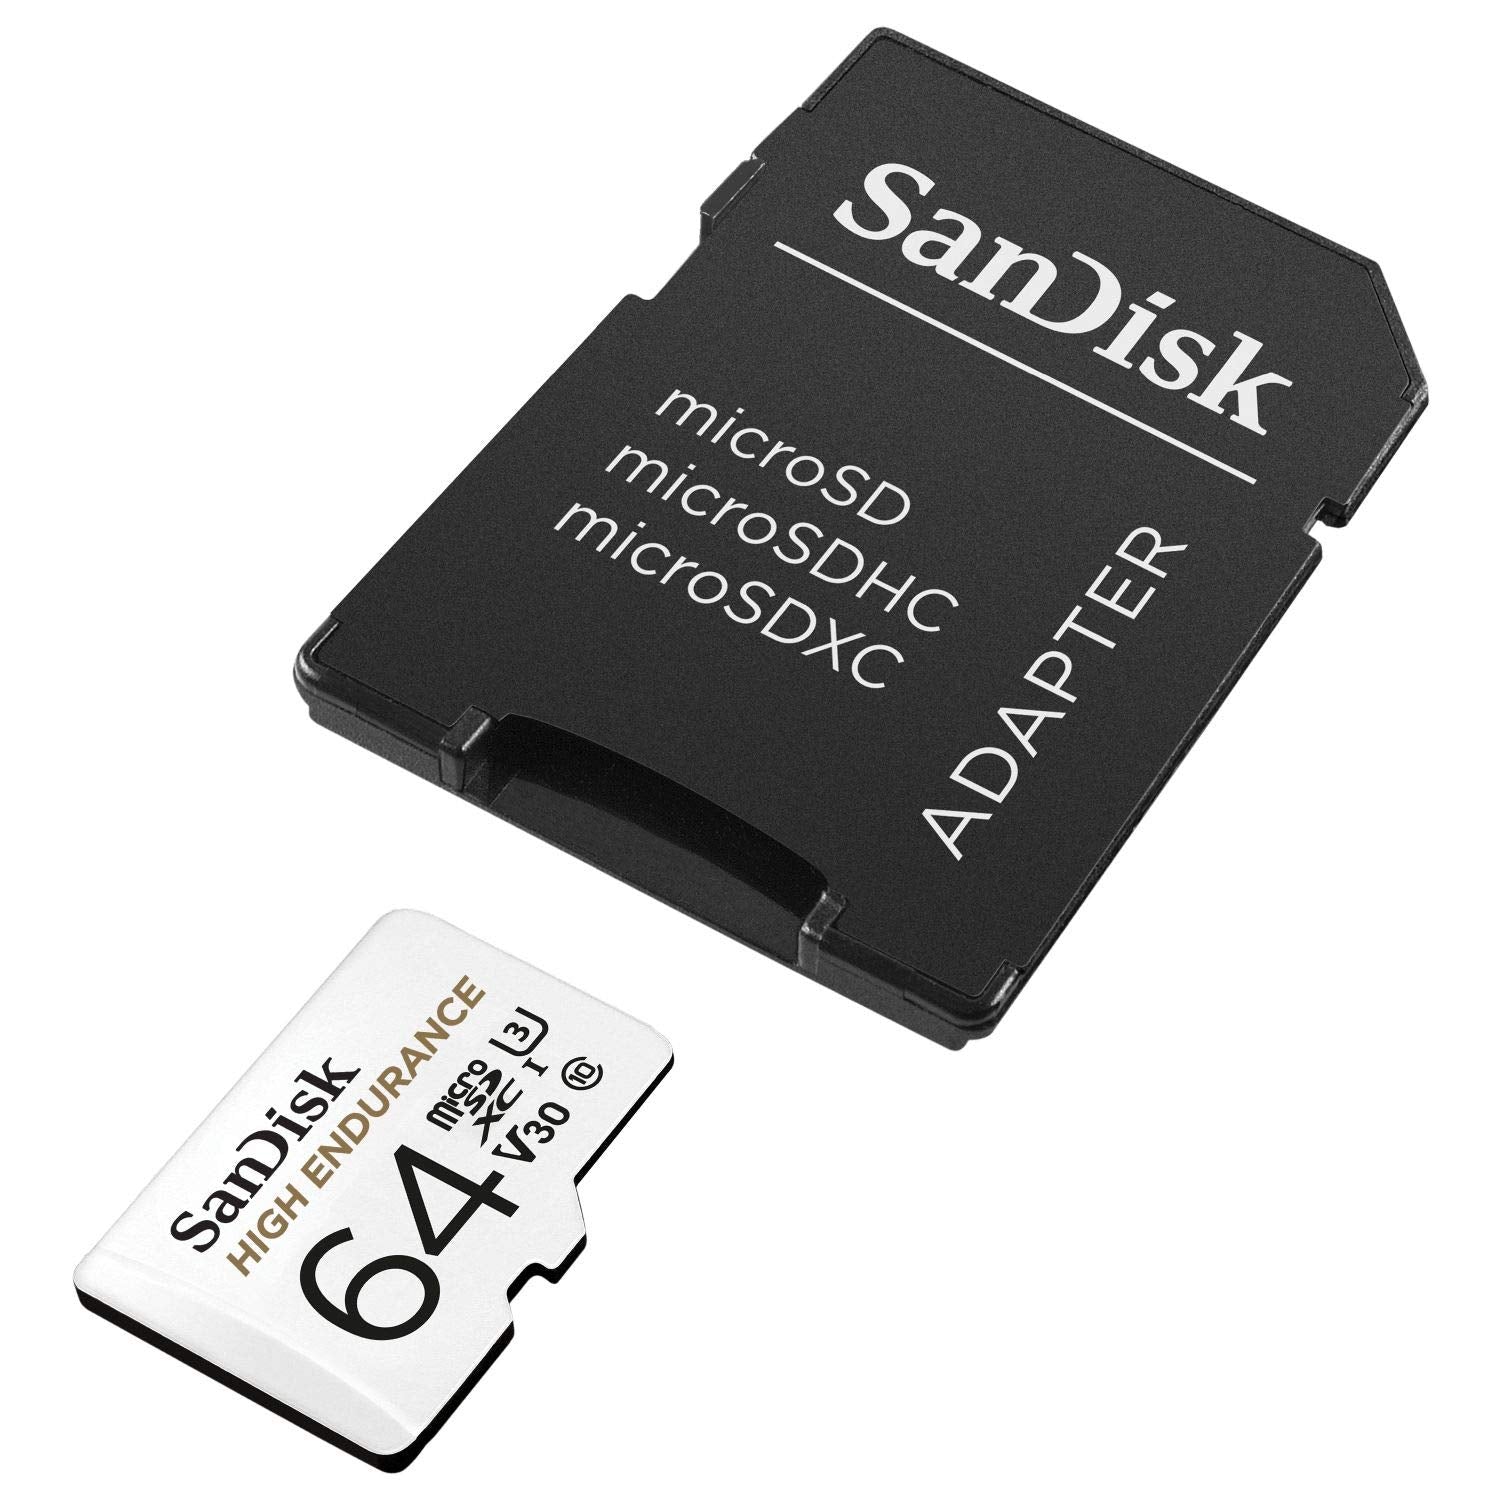 SanDisk 64GB High Endurance Video MicroSDXC Card with Adapter for Dash Cam and Home Monitoring Systems - C10, U3, V30, 4K UHD, Micro SD Card - SDSQQNR-064G-GN6IA